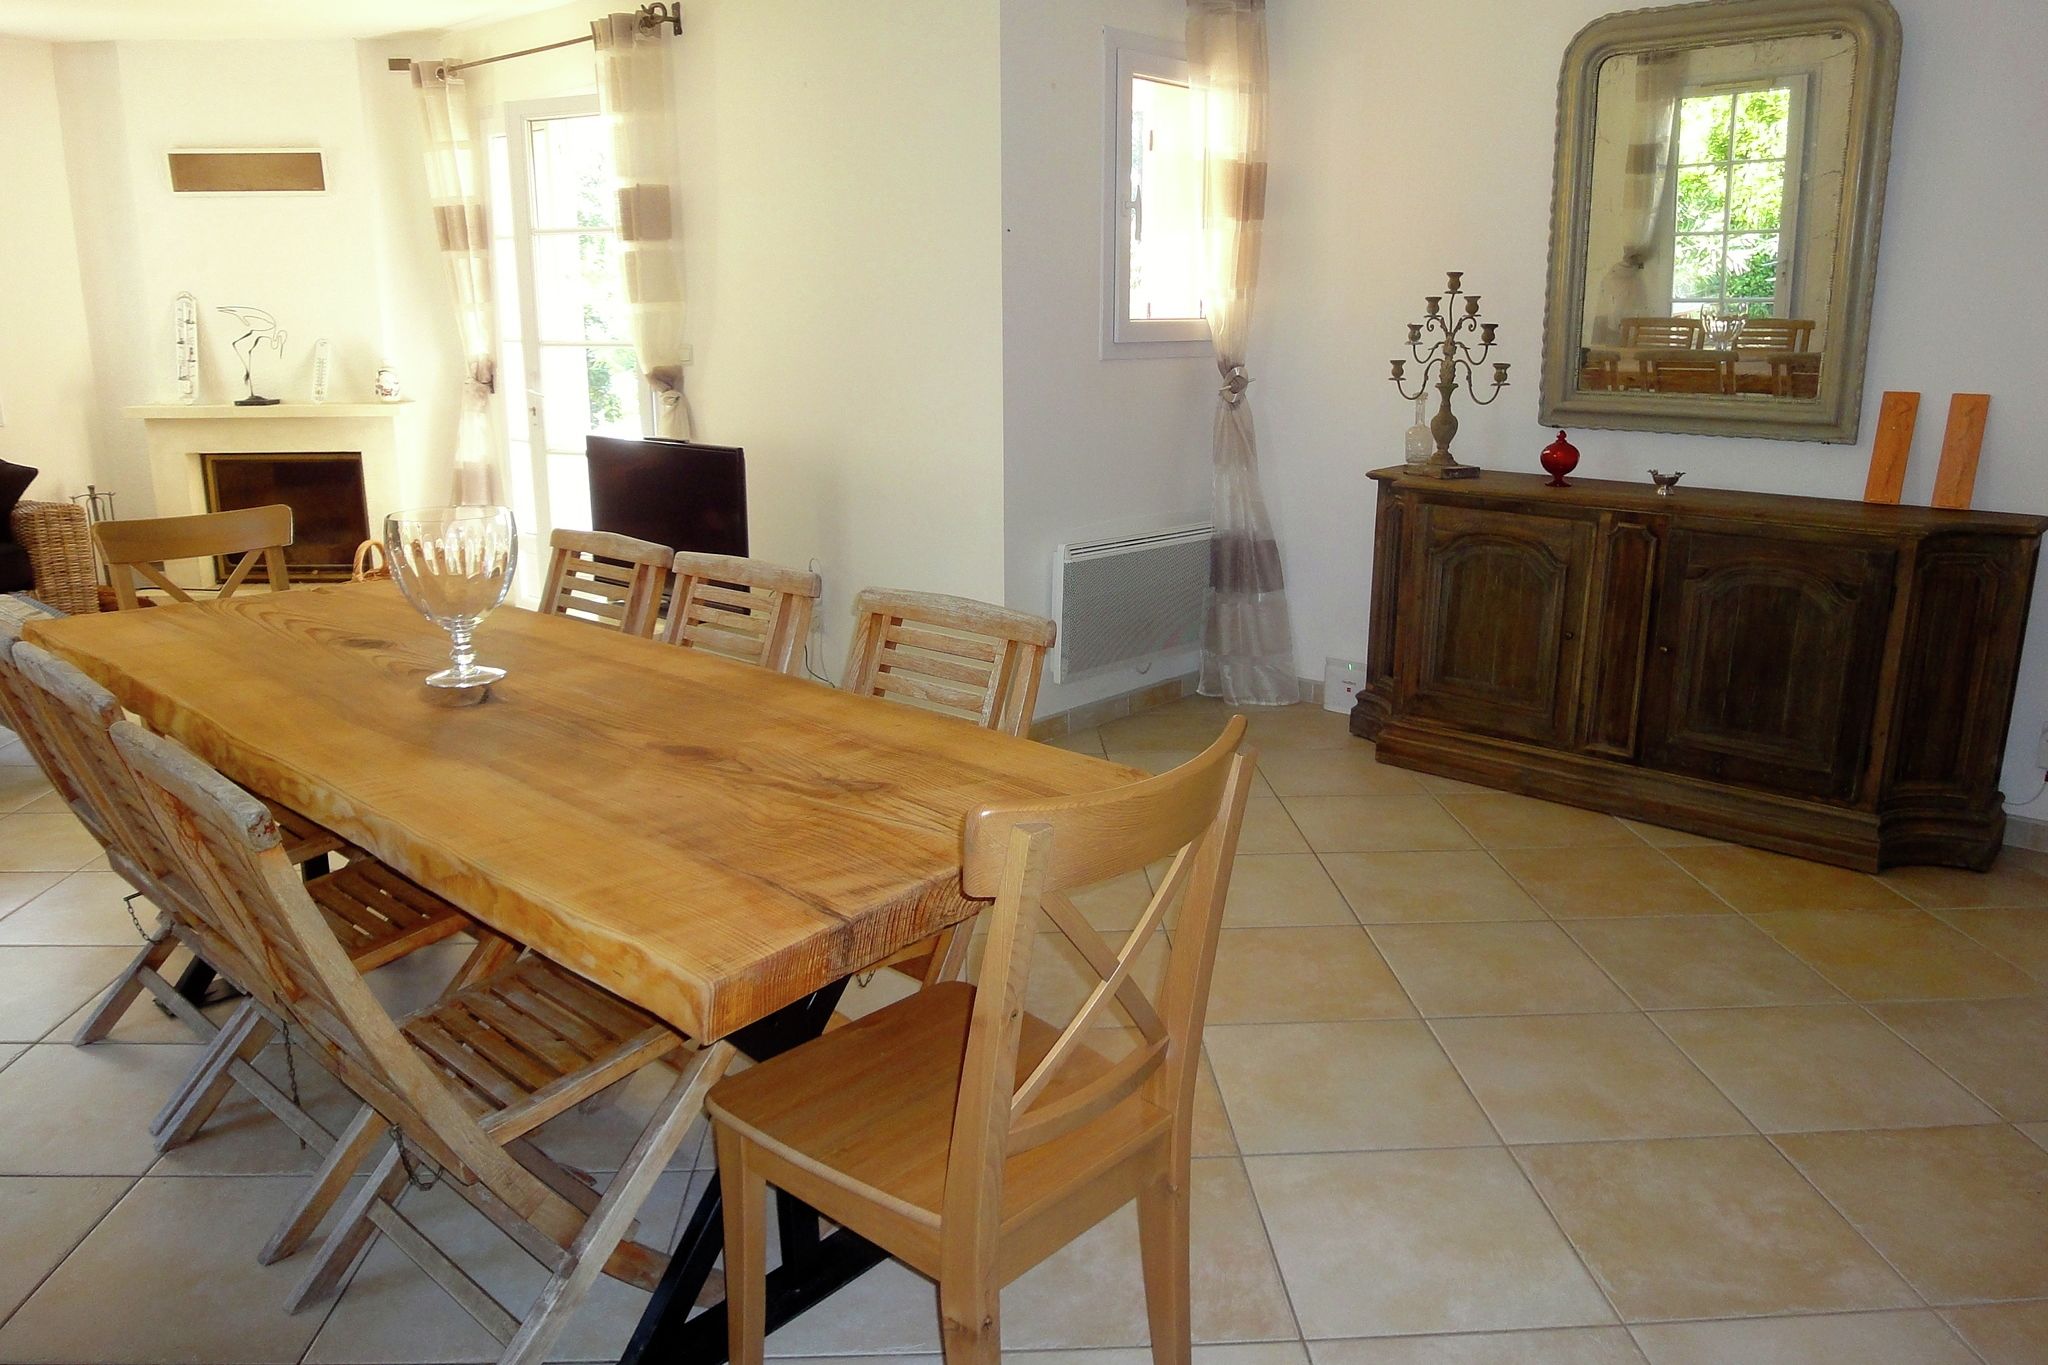 Country-style villa with private pool, walking distance from Flayosc